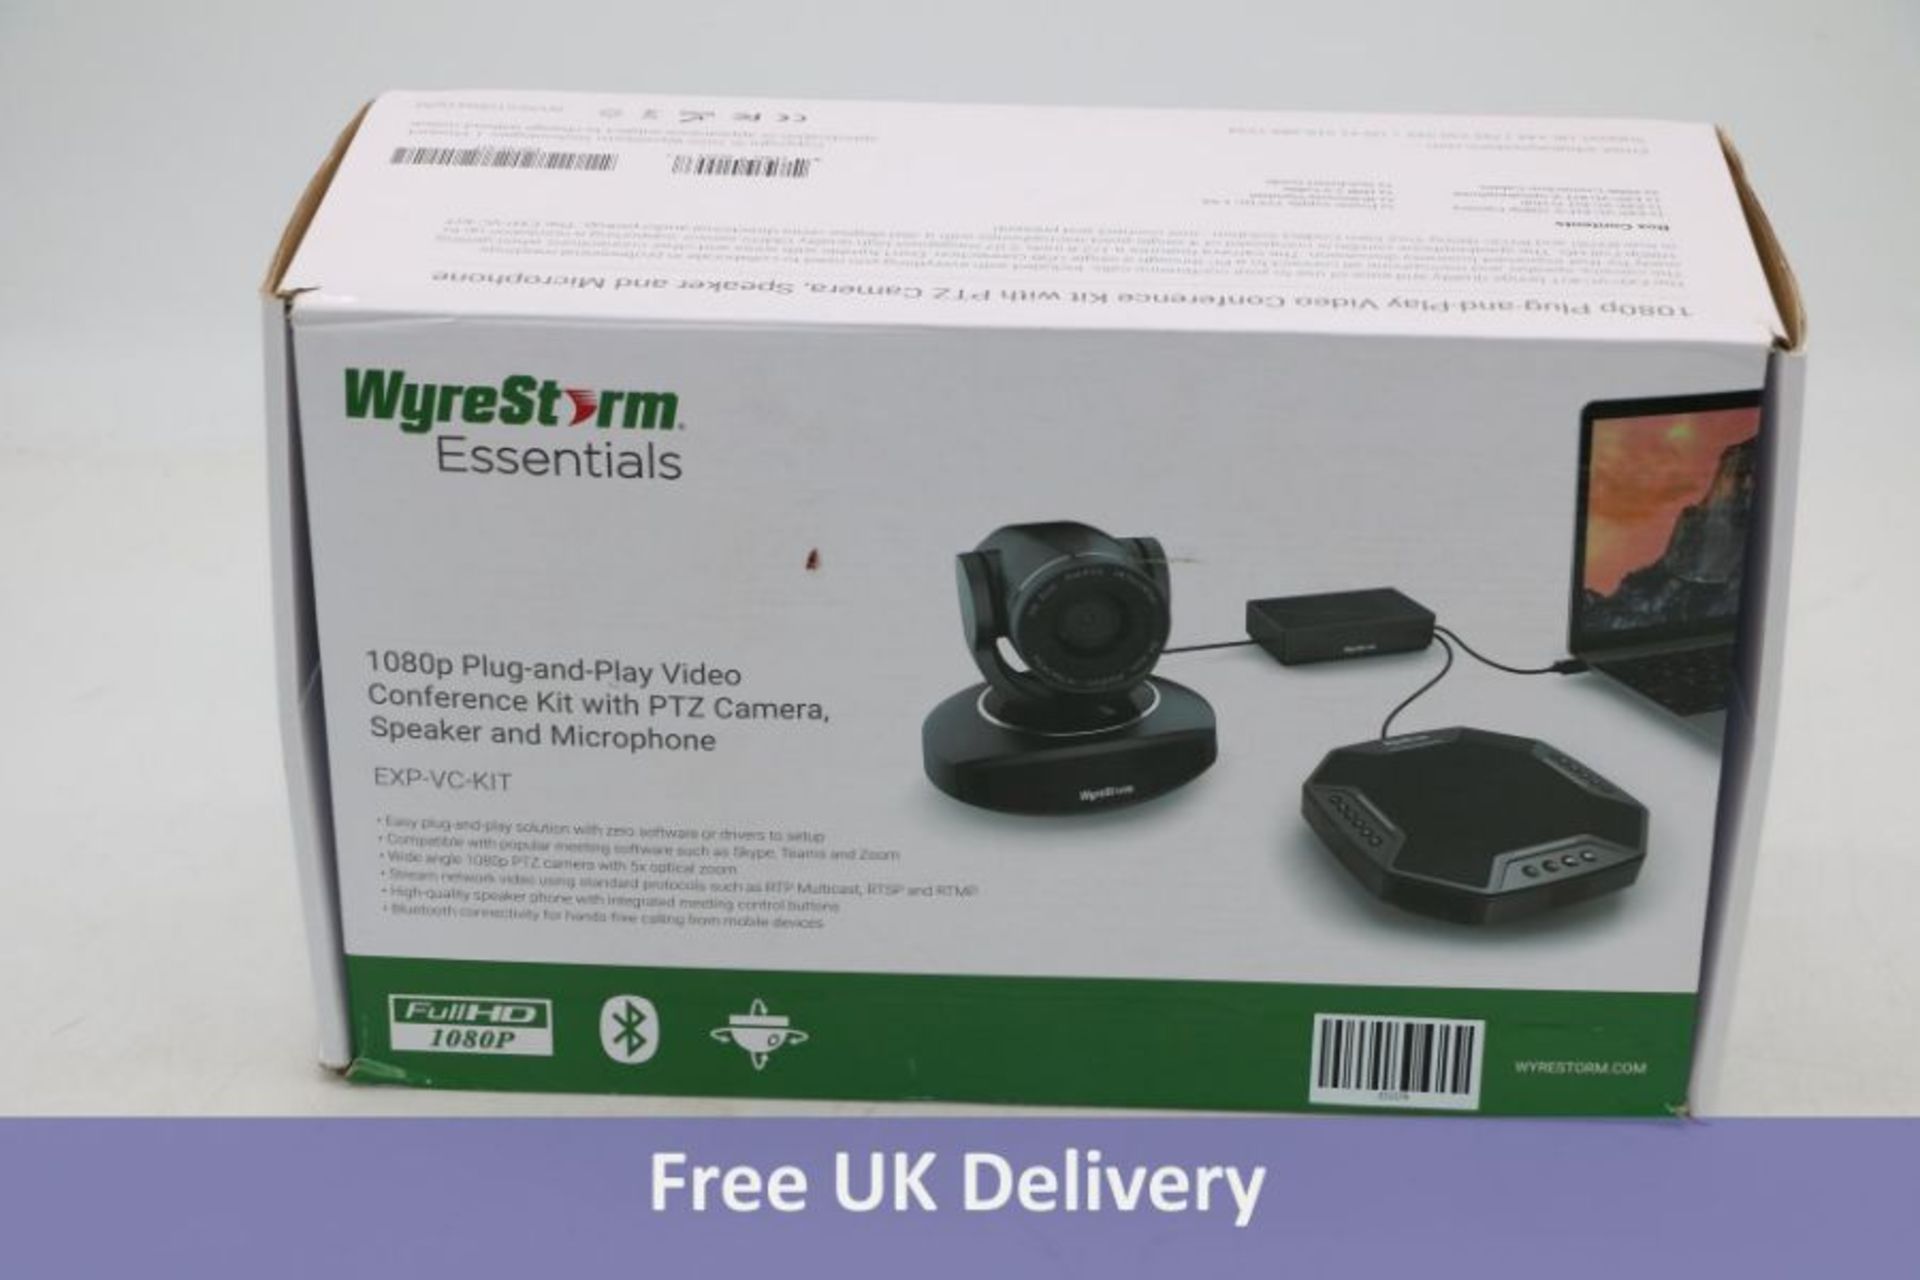 WyreStorm Essentials 1080p Plug & Play Video Conference Kit with PTZ Camera, Speaker & Microphone